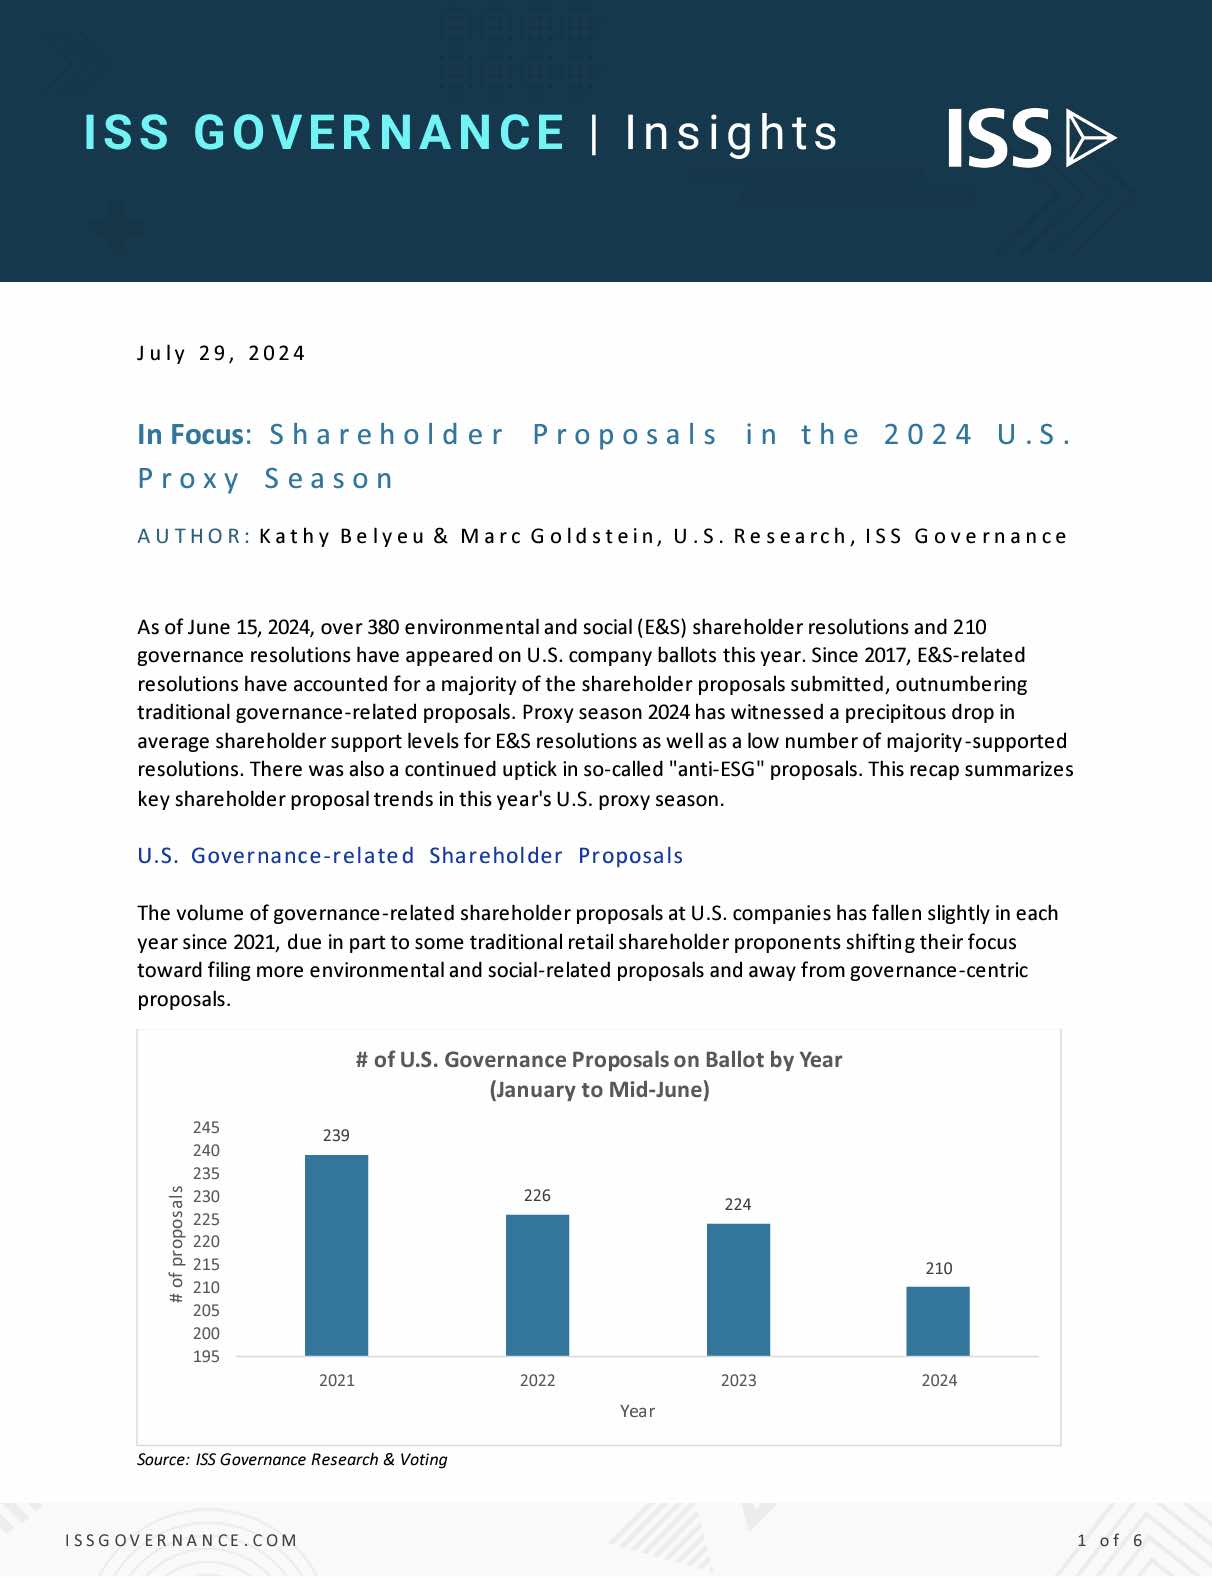 In Focus Shareholder Proposals in the 2024 US Proxy Season